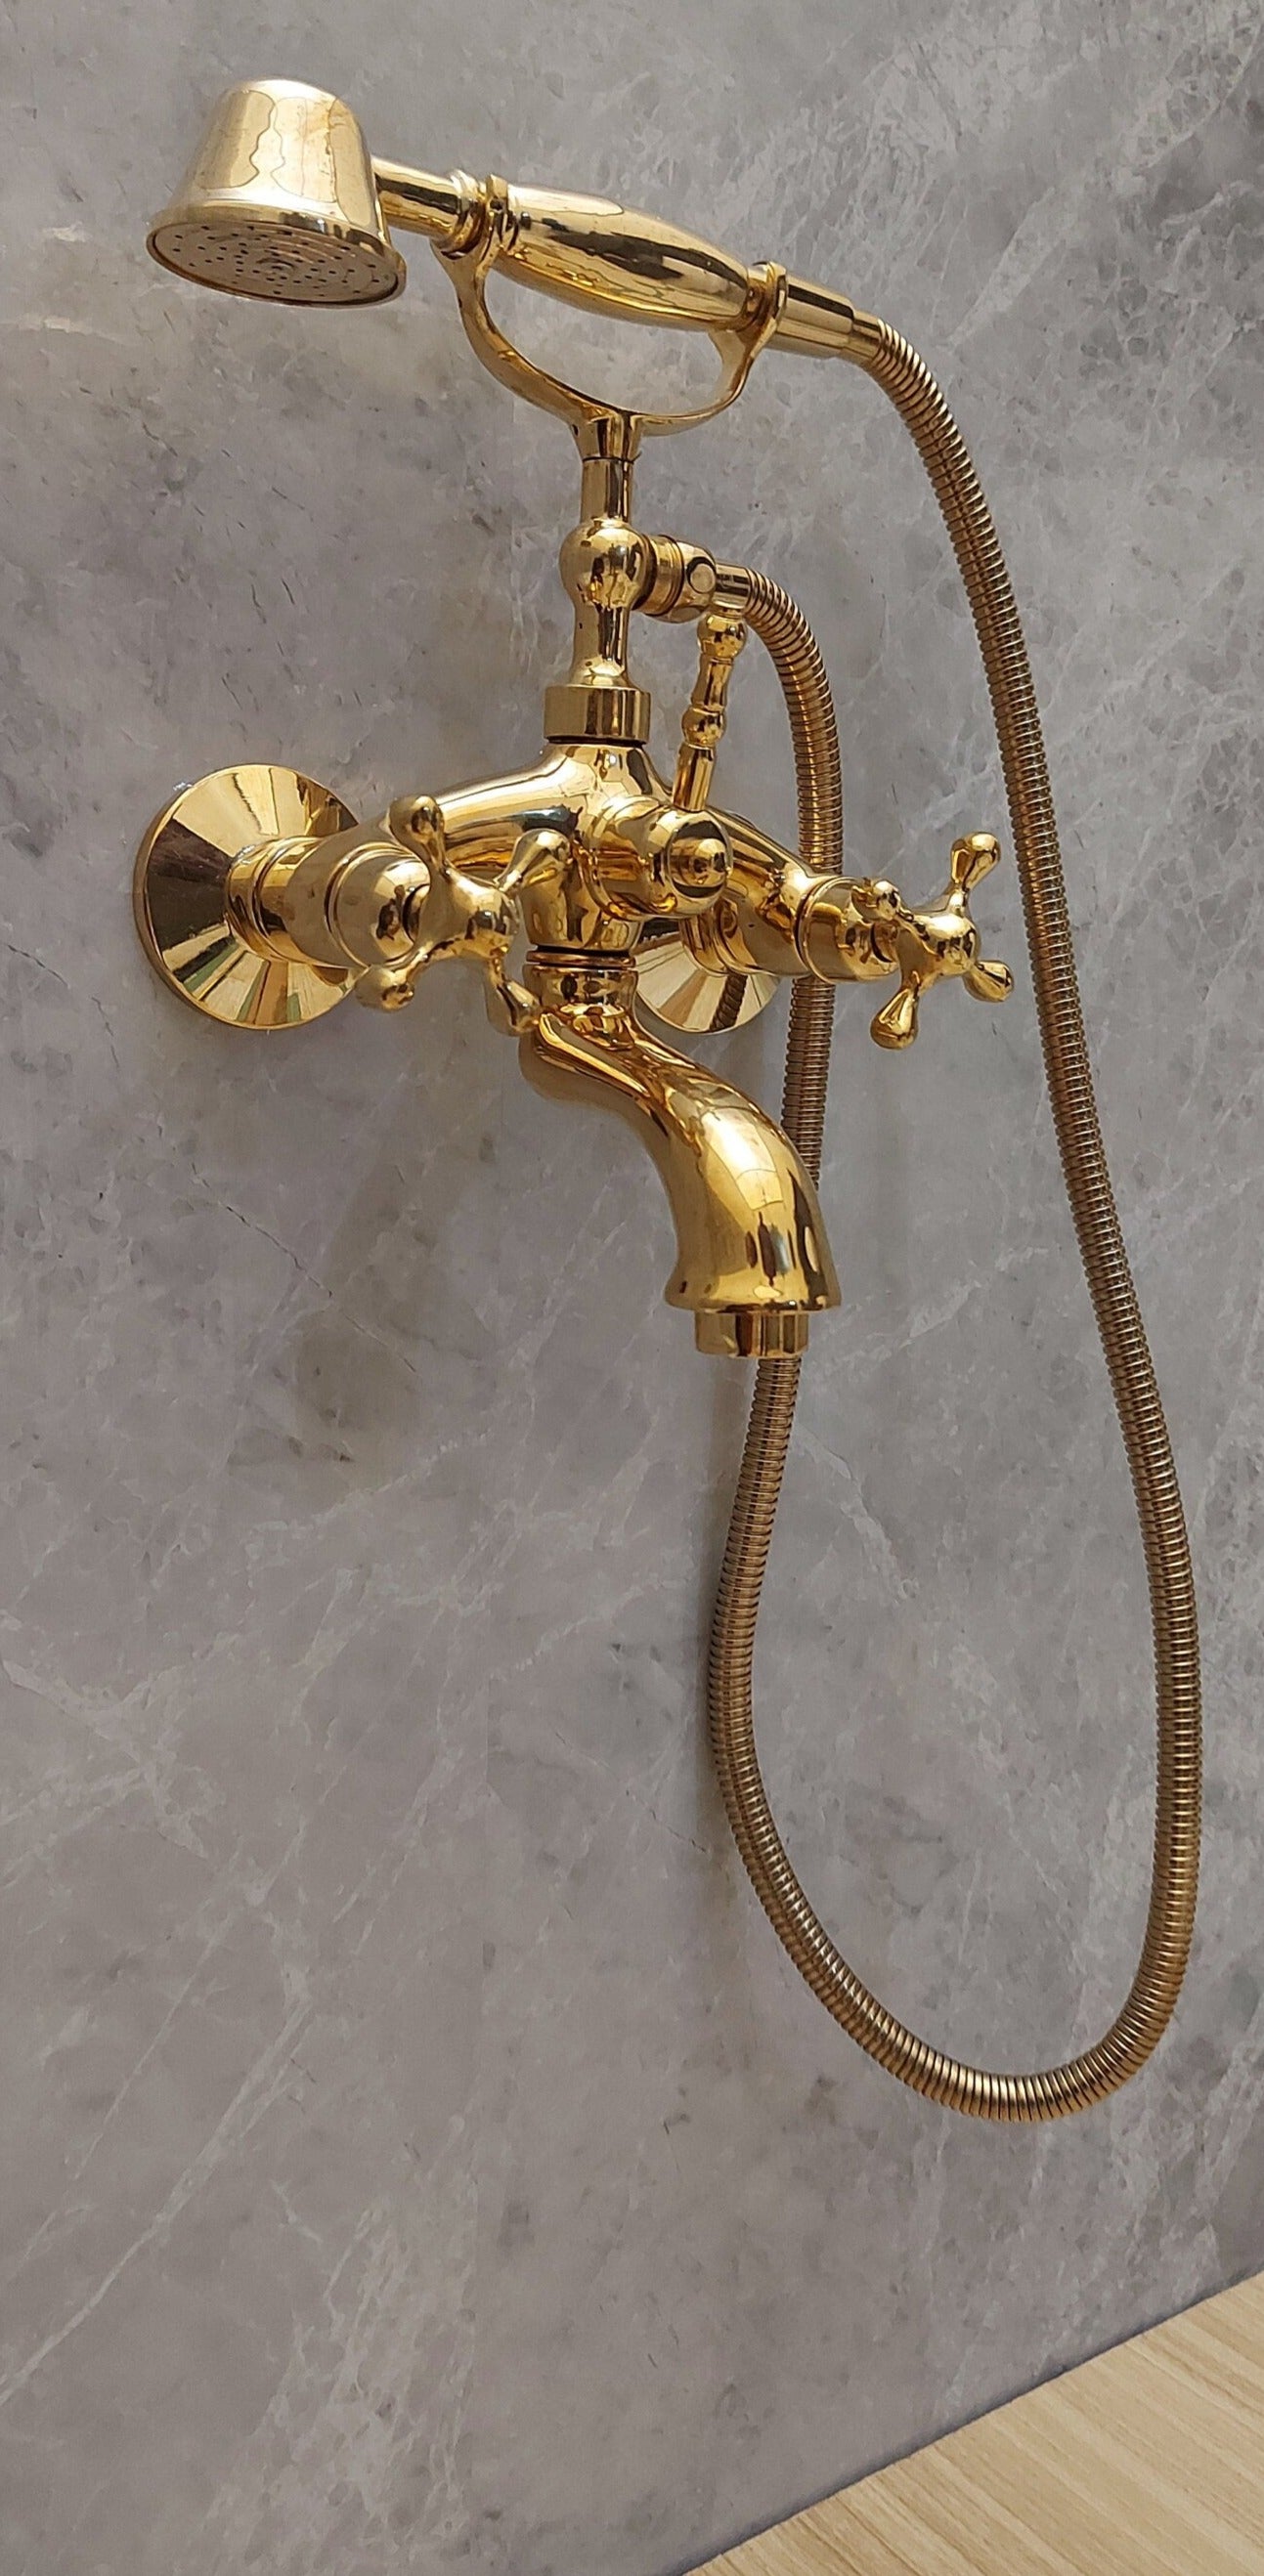 Wall Mounted Tub Faucet - Antique Brass Finish Zayian 